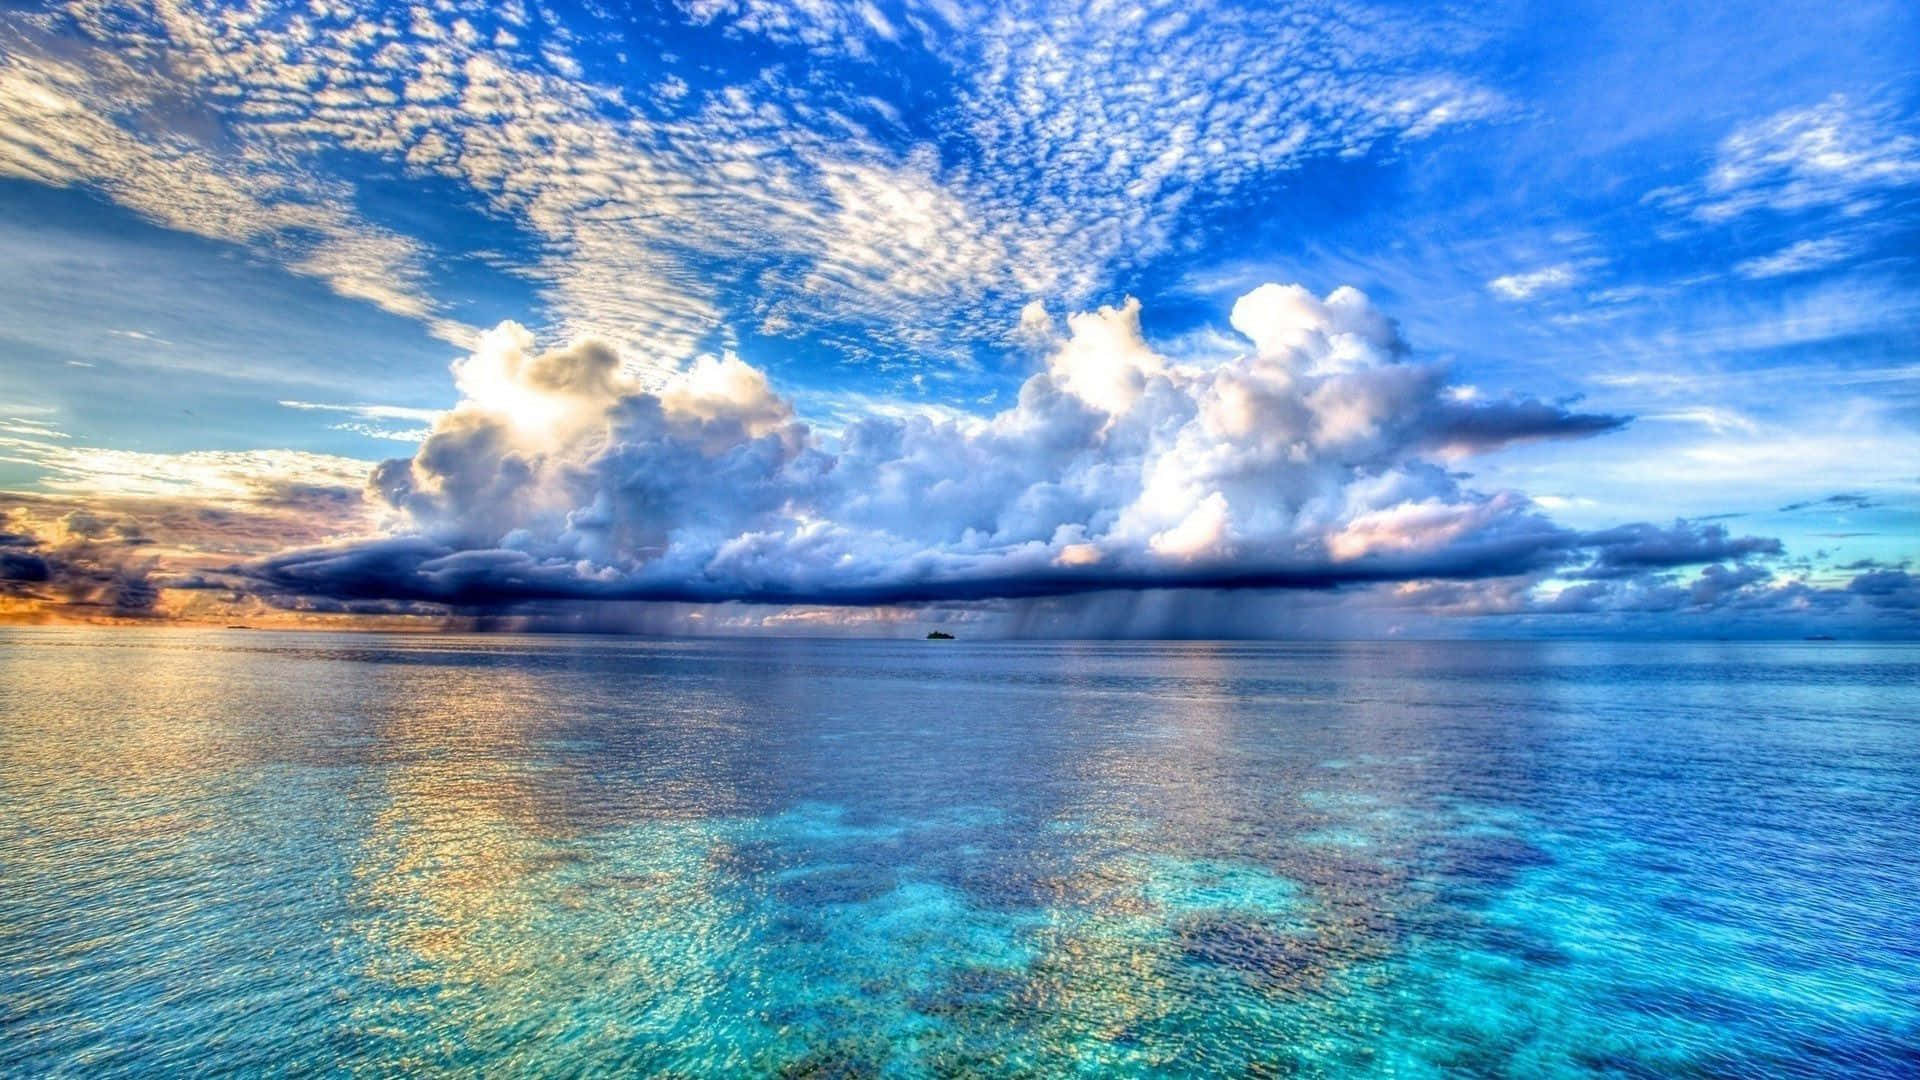 Cloud Formations Above The Sea Best Beach Background